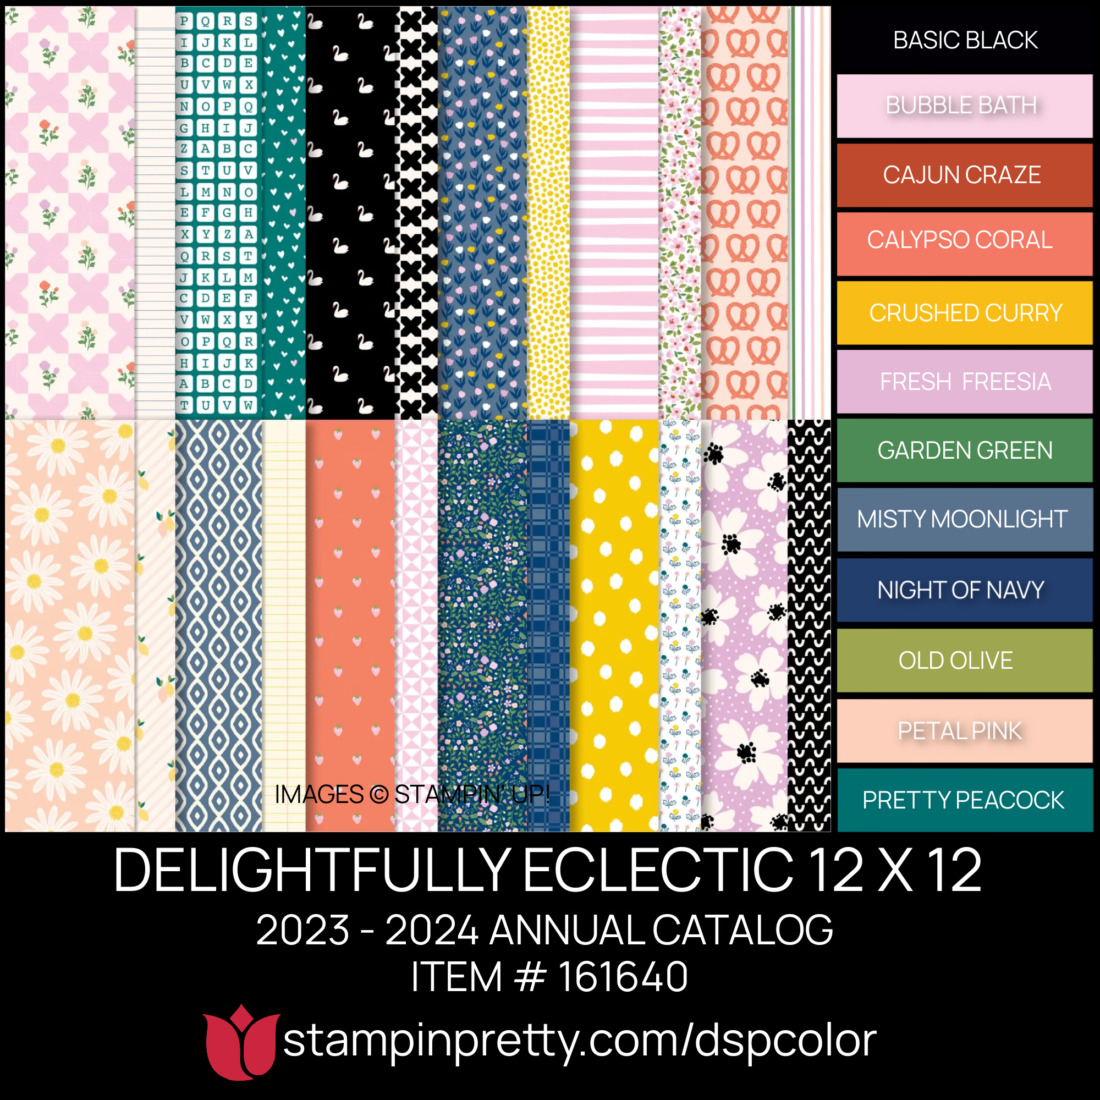 DELIGHTFULLY ECLECTIC 12 X 12 DSP Coordinating Colors 161640 Stampin' Pretty Mary Fish Shop Online 24-7